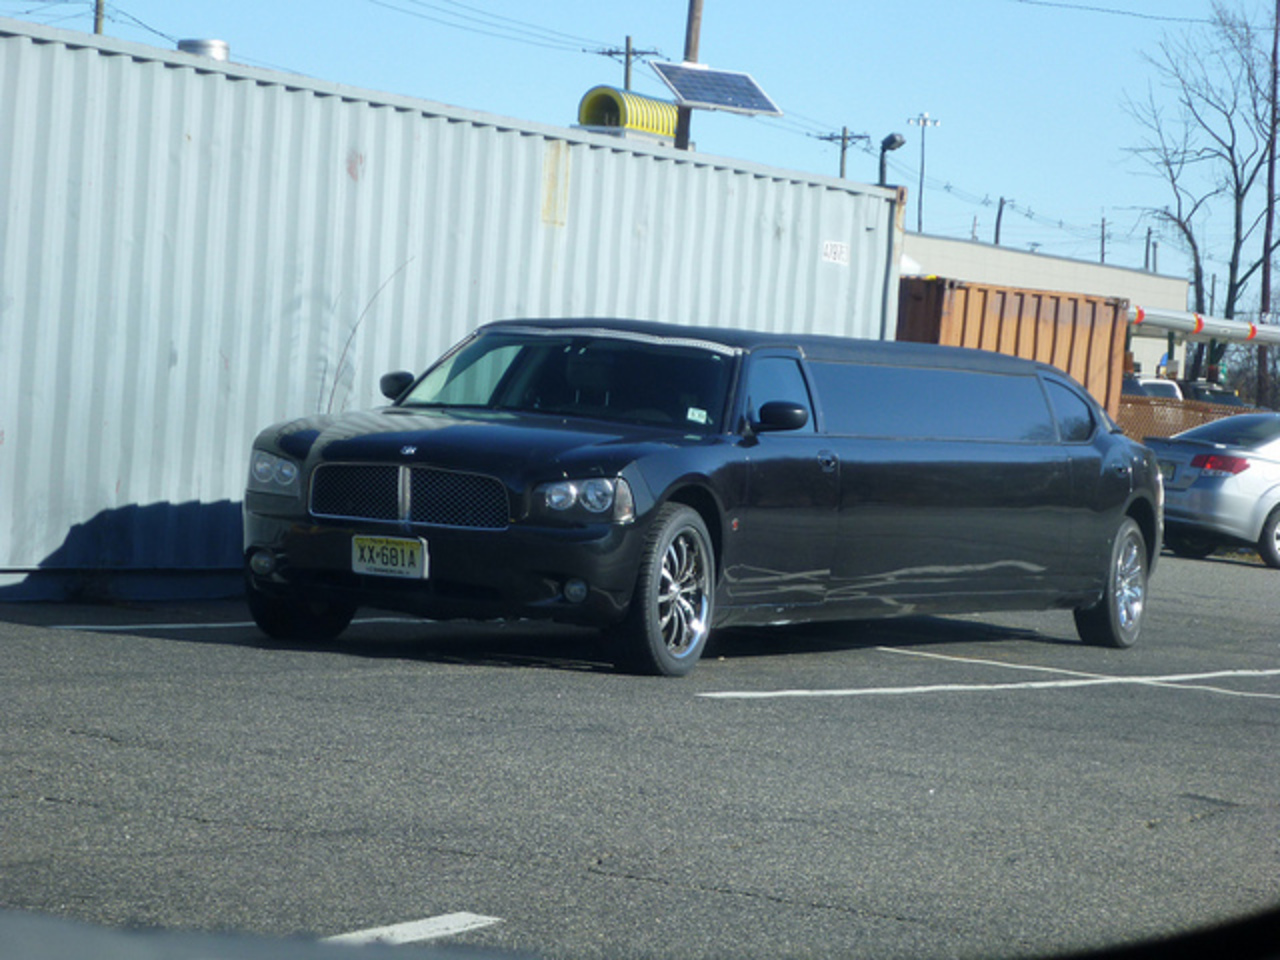 Stretch Dodge Charger limo | Flickr - Photo Sharing!